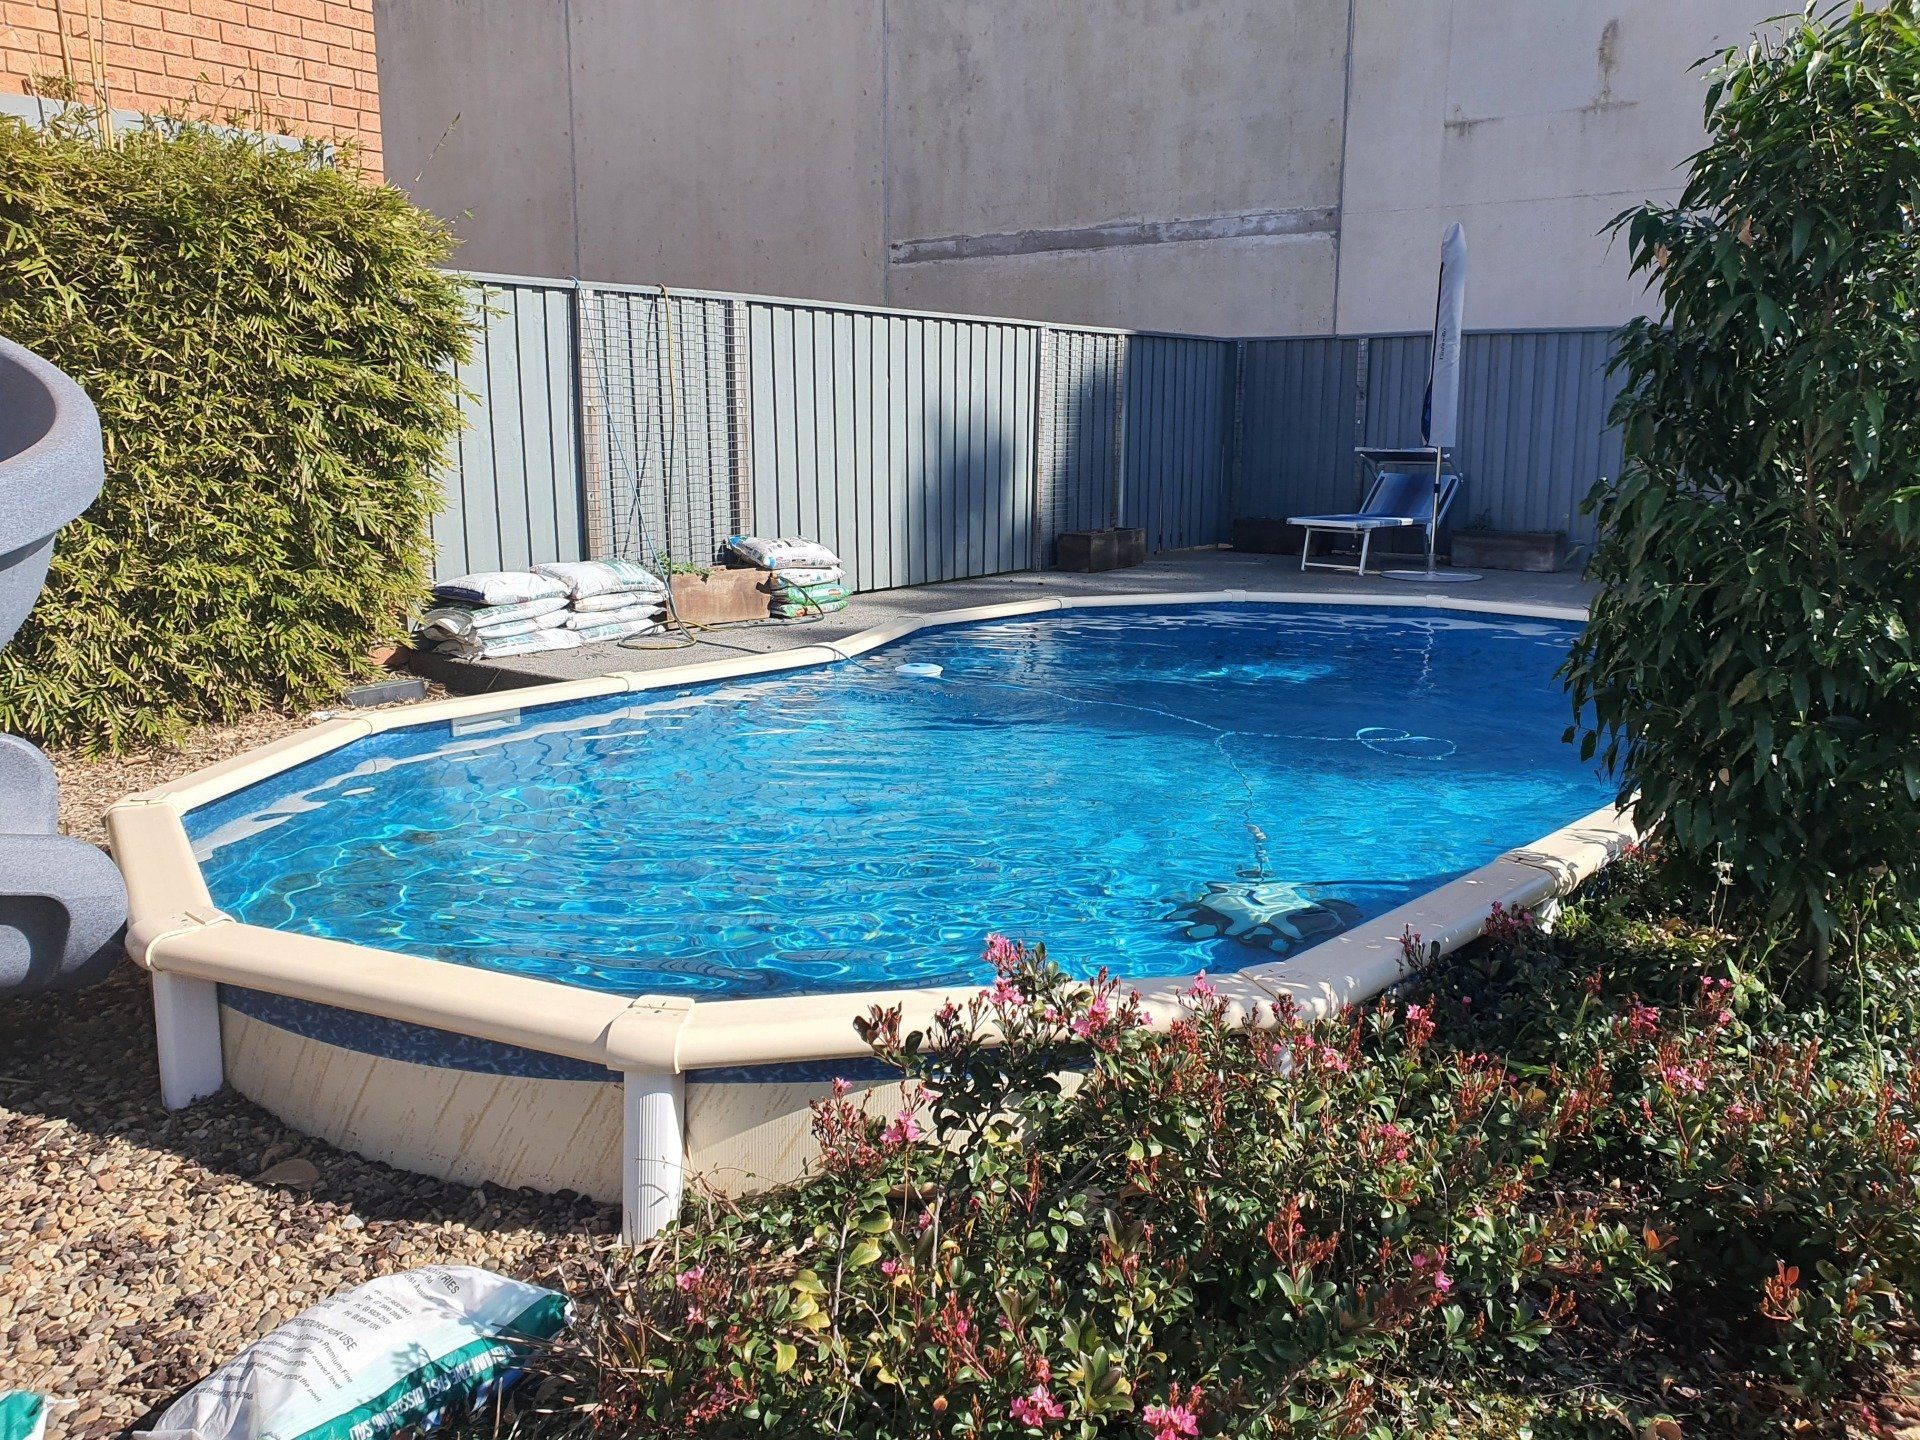 Above Ground Pool Installation — Pool Installation in Macquarie Fields, NSW